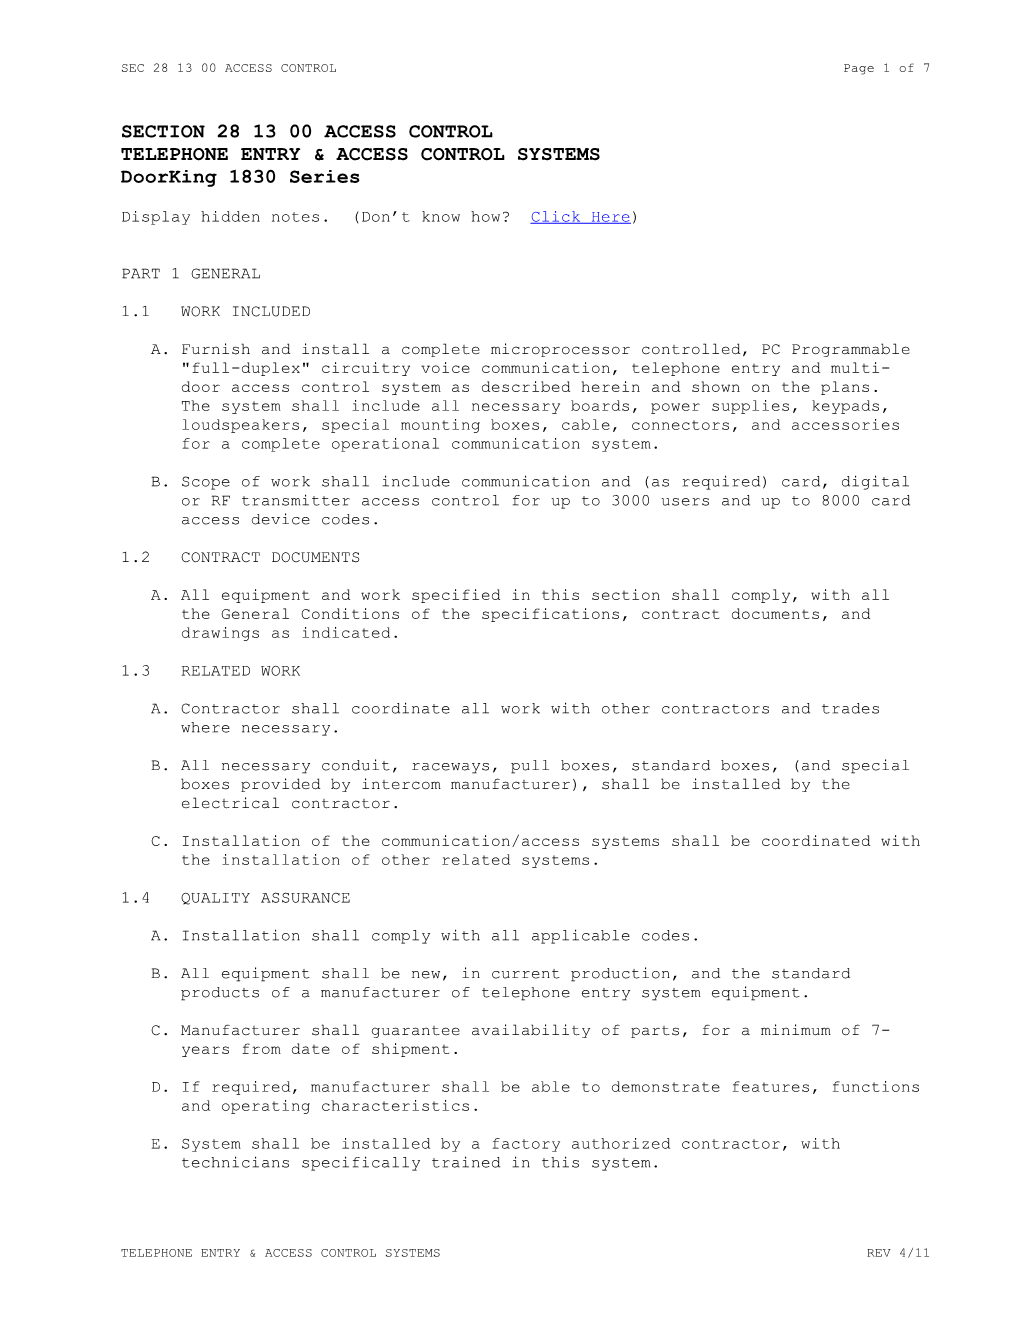 SEC 28 13 00 ACCESS CONTROL Page 6 of 7